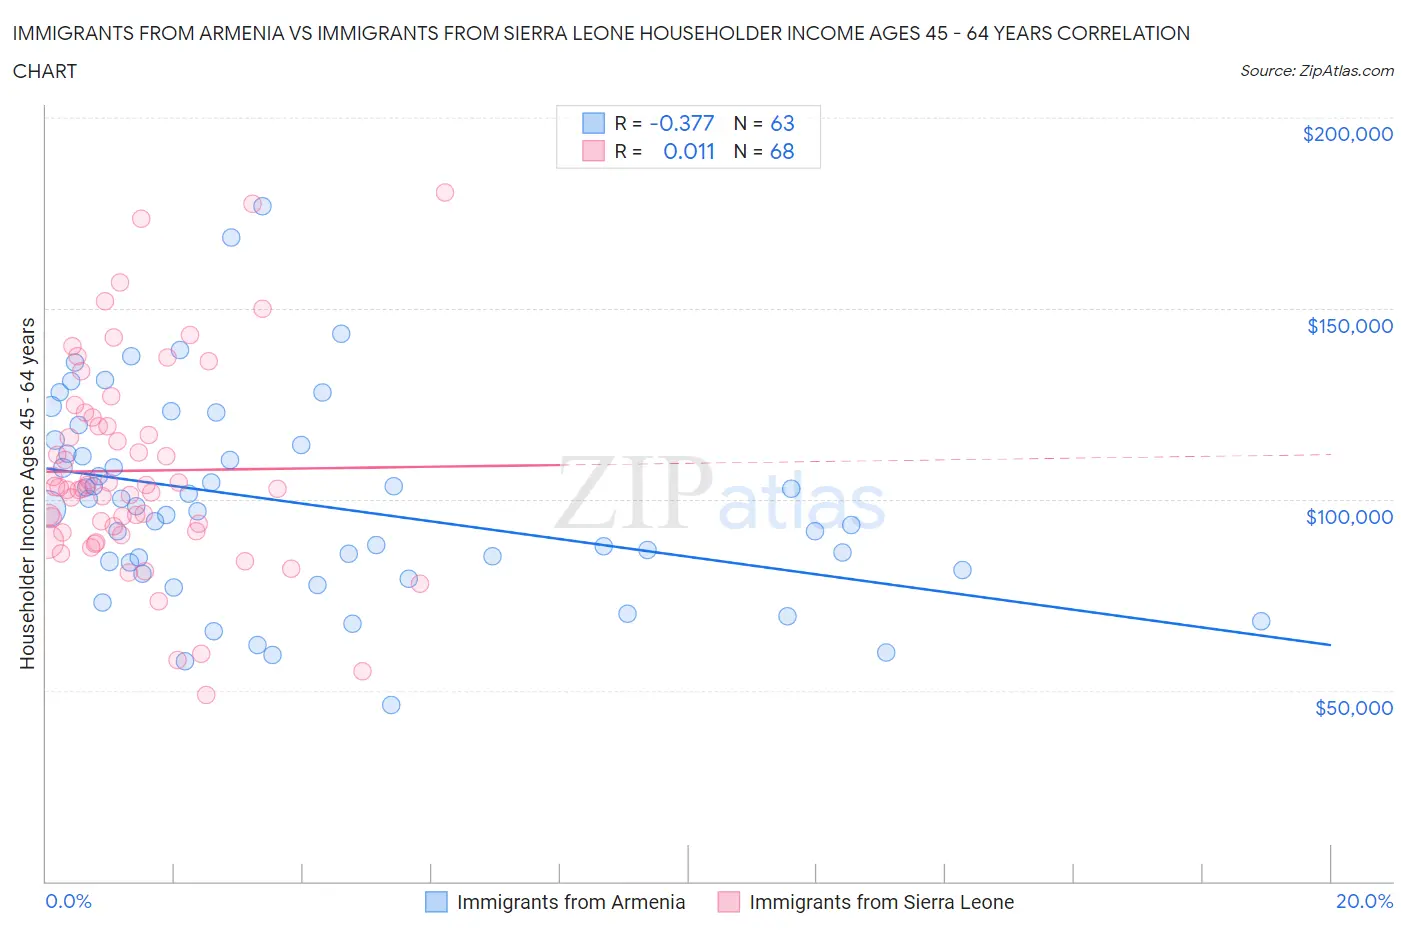 Immigrants from Armenia vs Immigrants from Sierra Leone Householder Income Ages 45 - 64 years